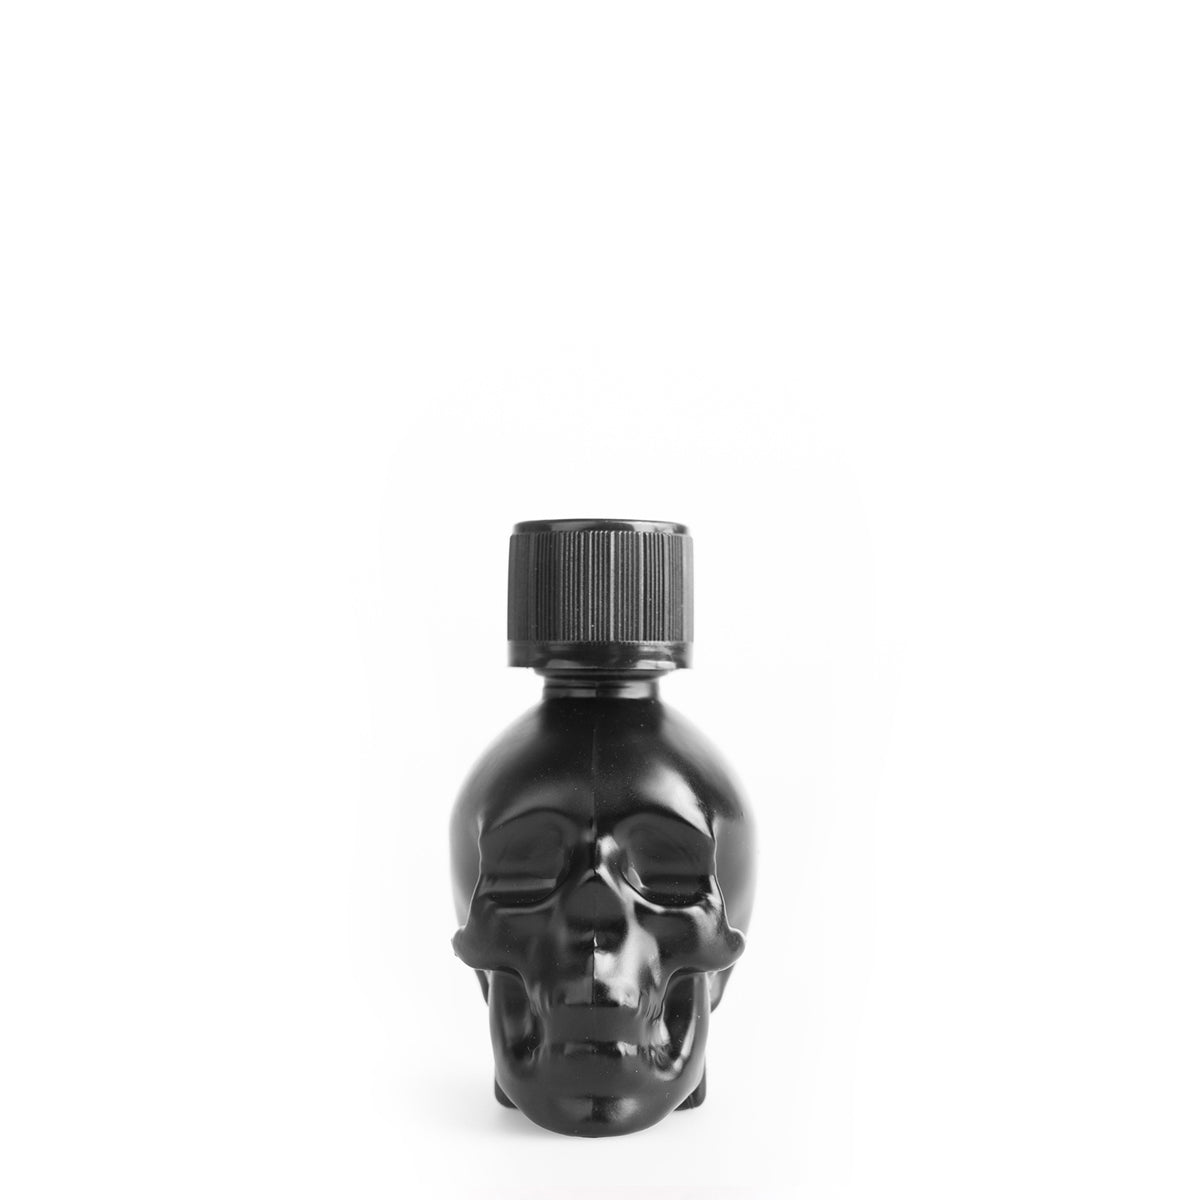 A product photo taken front on of Skull Fuck Onyx Poppers.